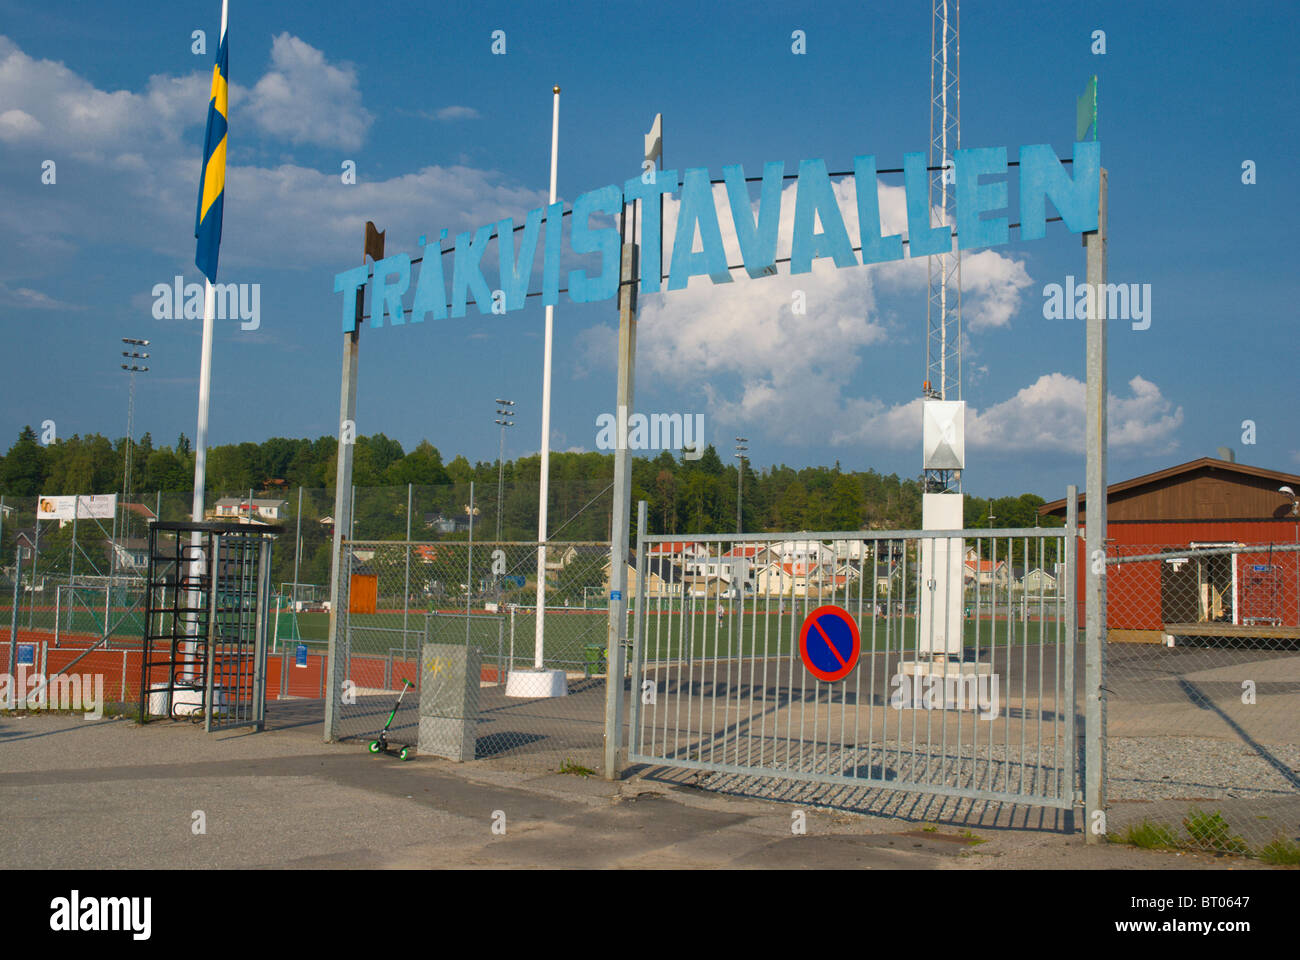 Sports complex Träkvist town outside Stocholm Sweden Europe Stock Photo